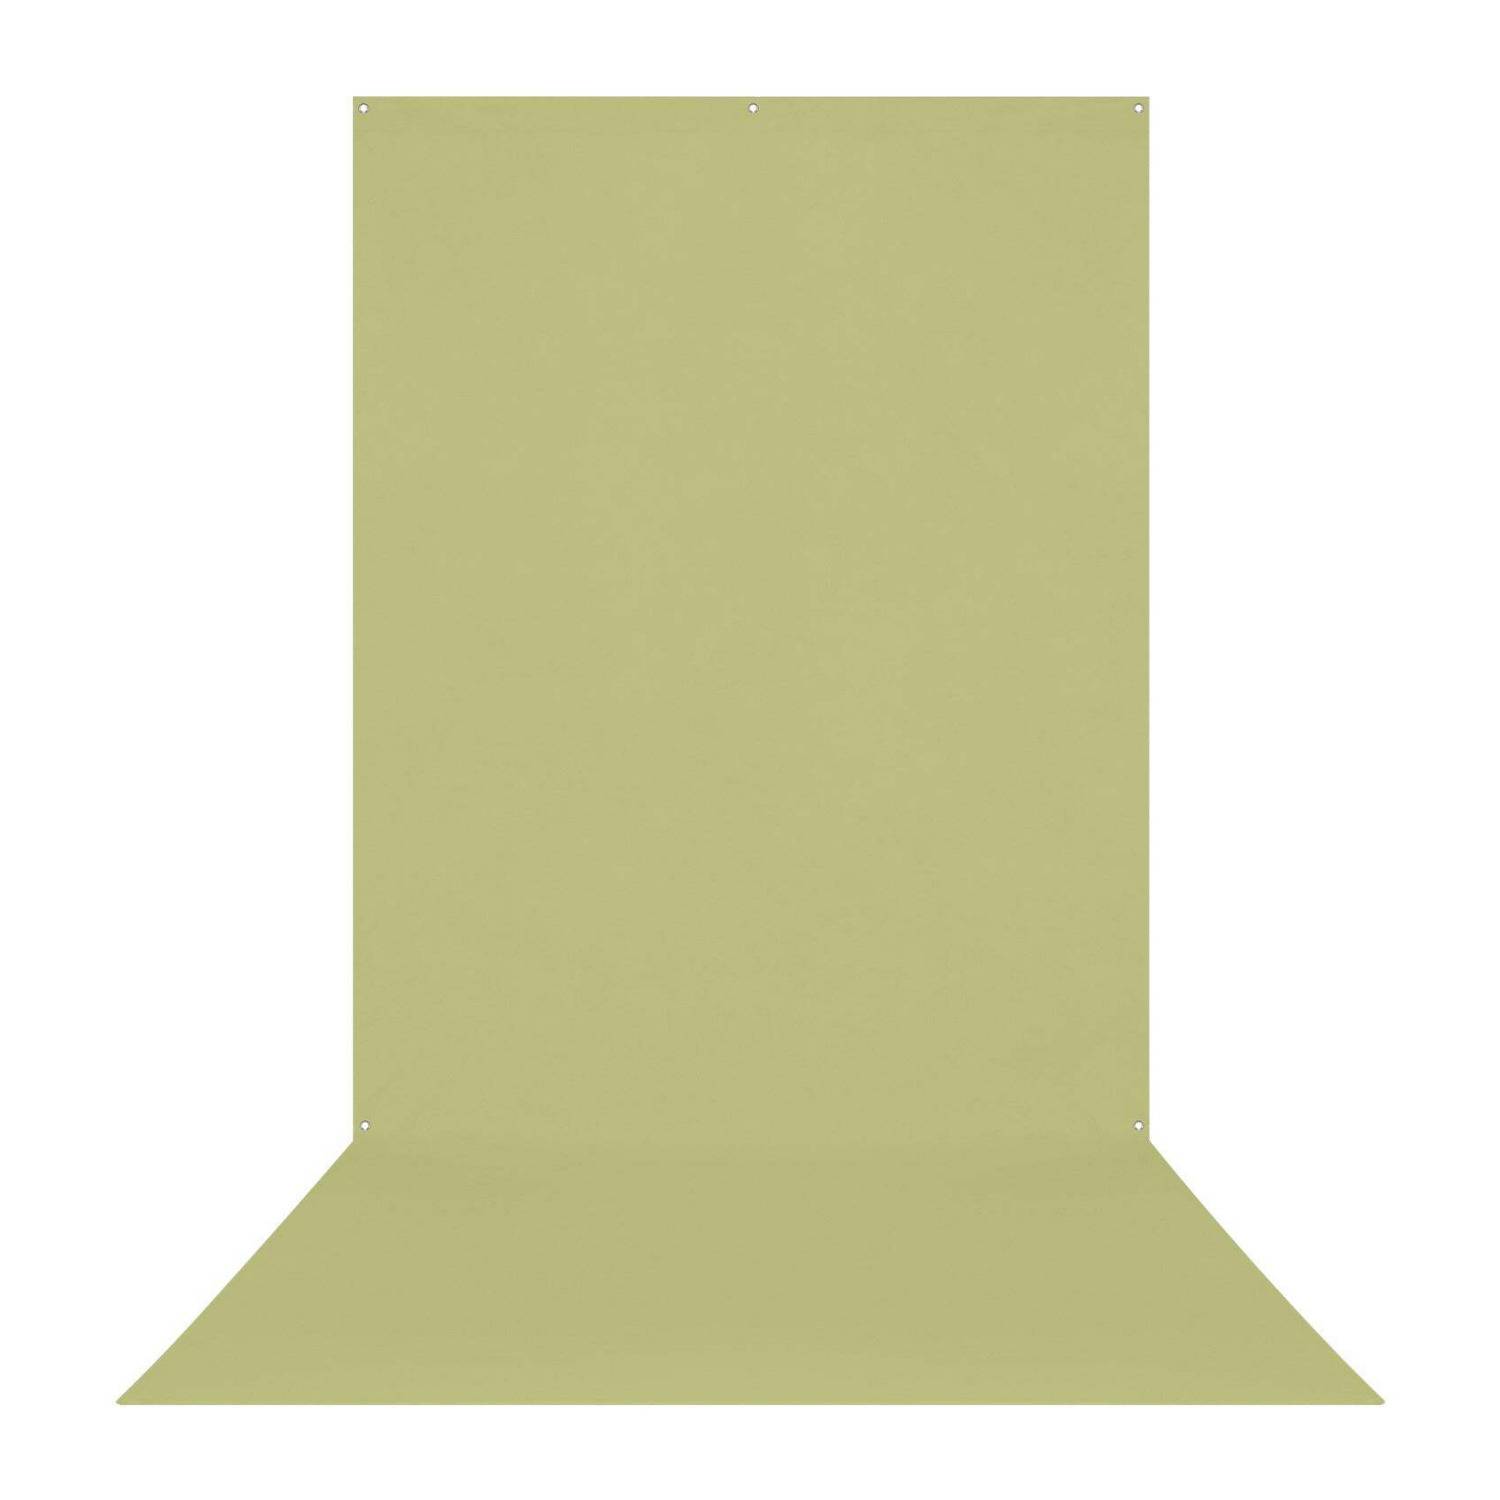 Westcott X-Drop Wrinkle-Resistant Backdrop, For Video Conferencing (Light Moss Green, 5 x 12 Feet)